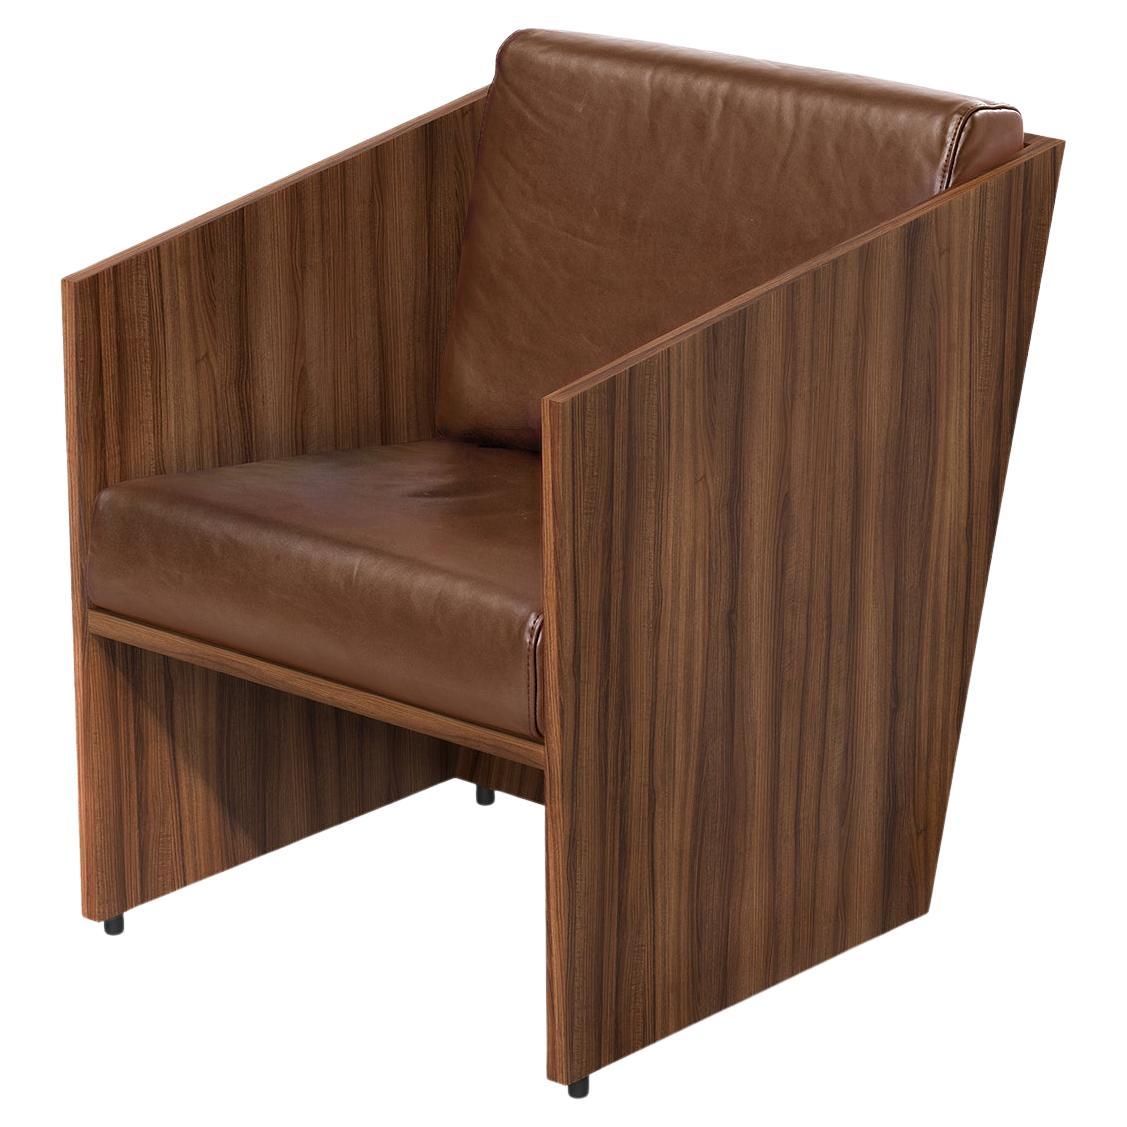 Álvaro Siza Vieira - Armchair in Walnut Wood and Brown Leather - one of a kind